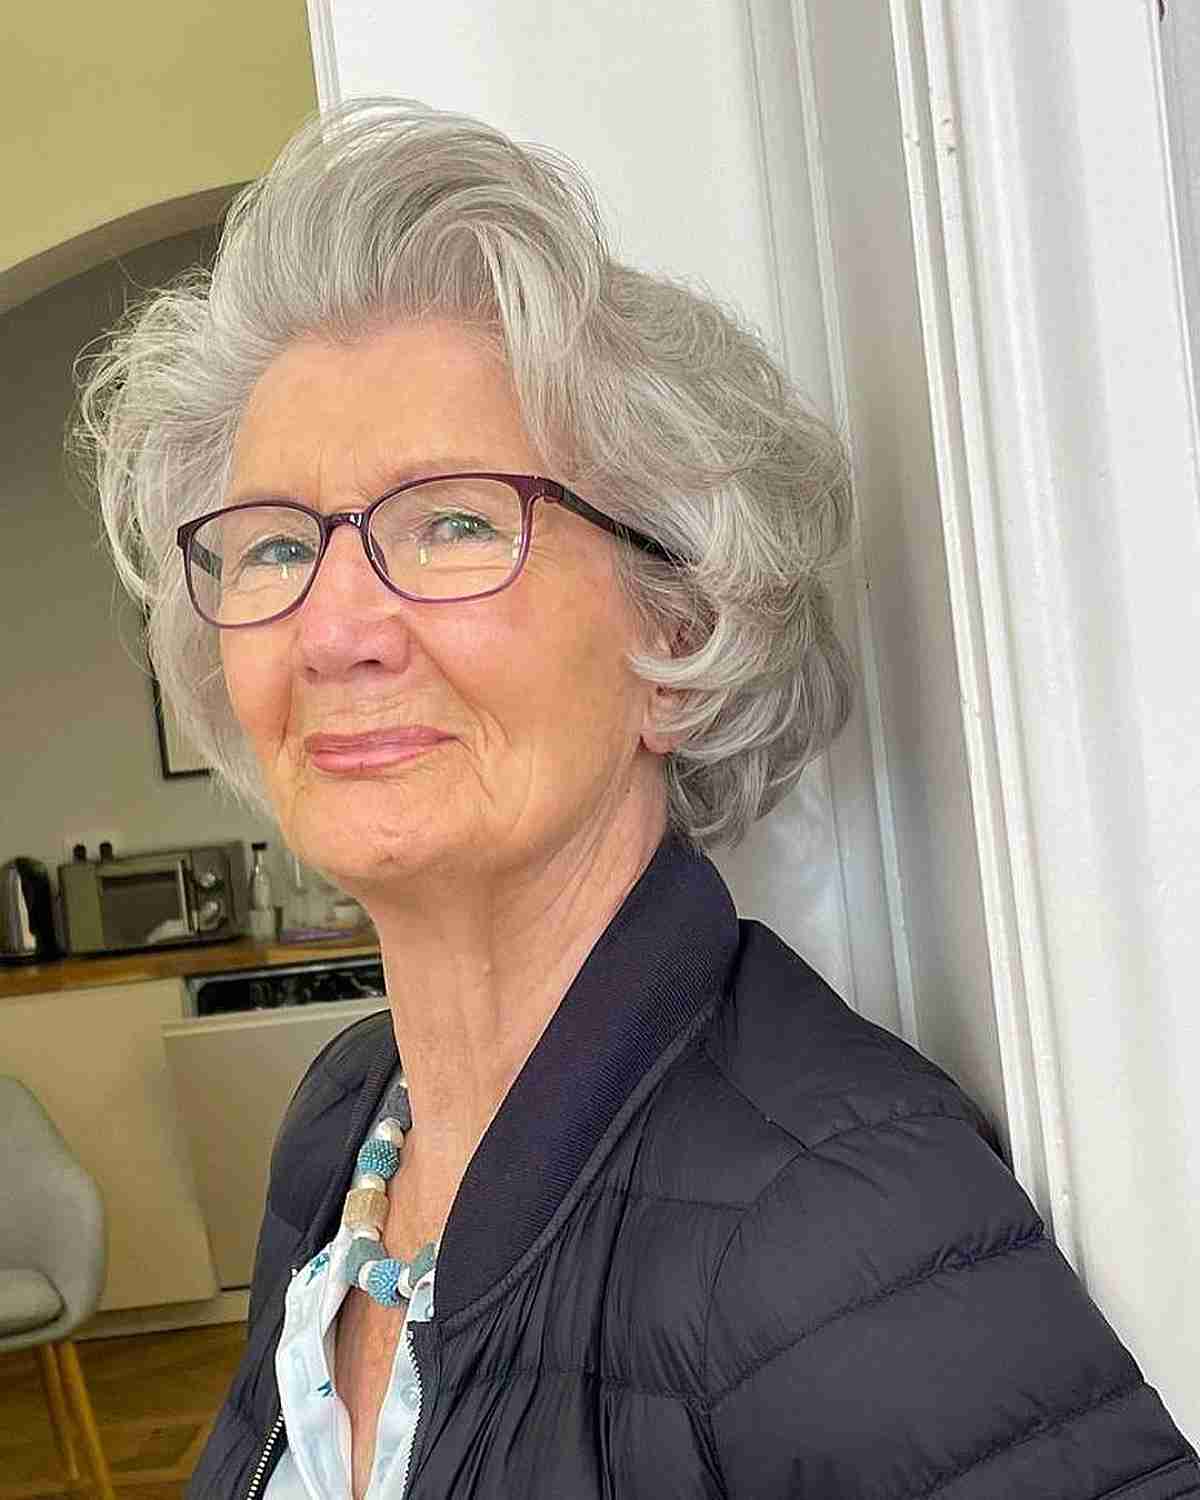 Short Feathered Cut for Wavy Hair with Glasses for 70-Year-Olds